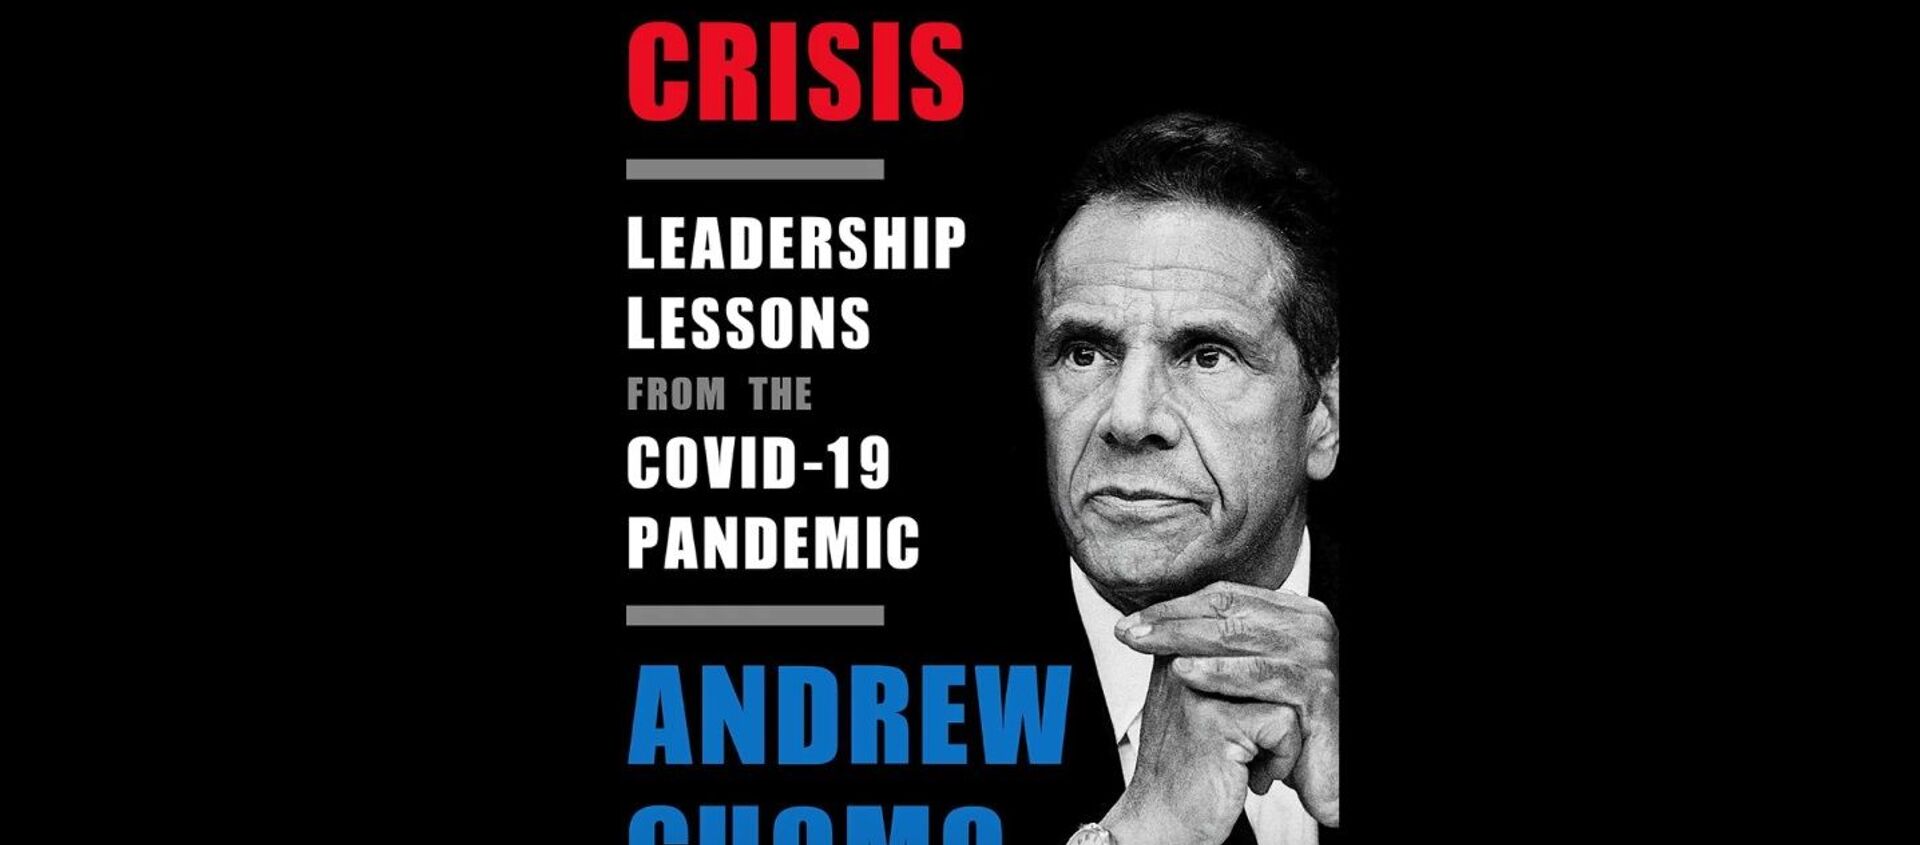 American Crisis | Leadership Lessons from the COVID-19 Pandemic | Andrew Cuomo - Sputnik International, 1920, 18.05.2021